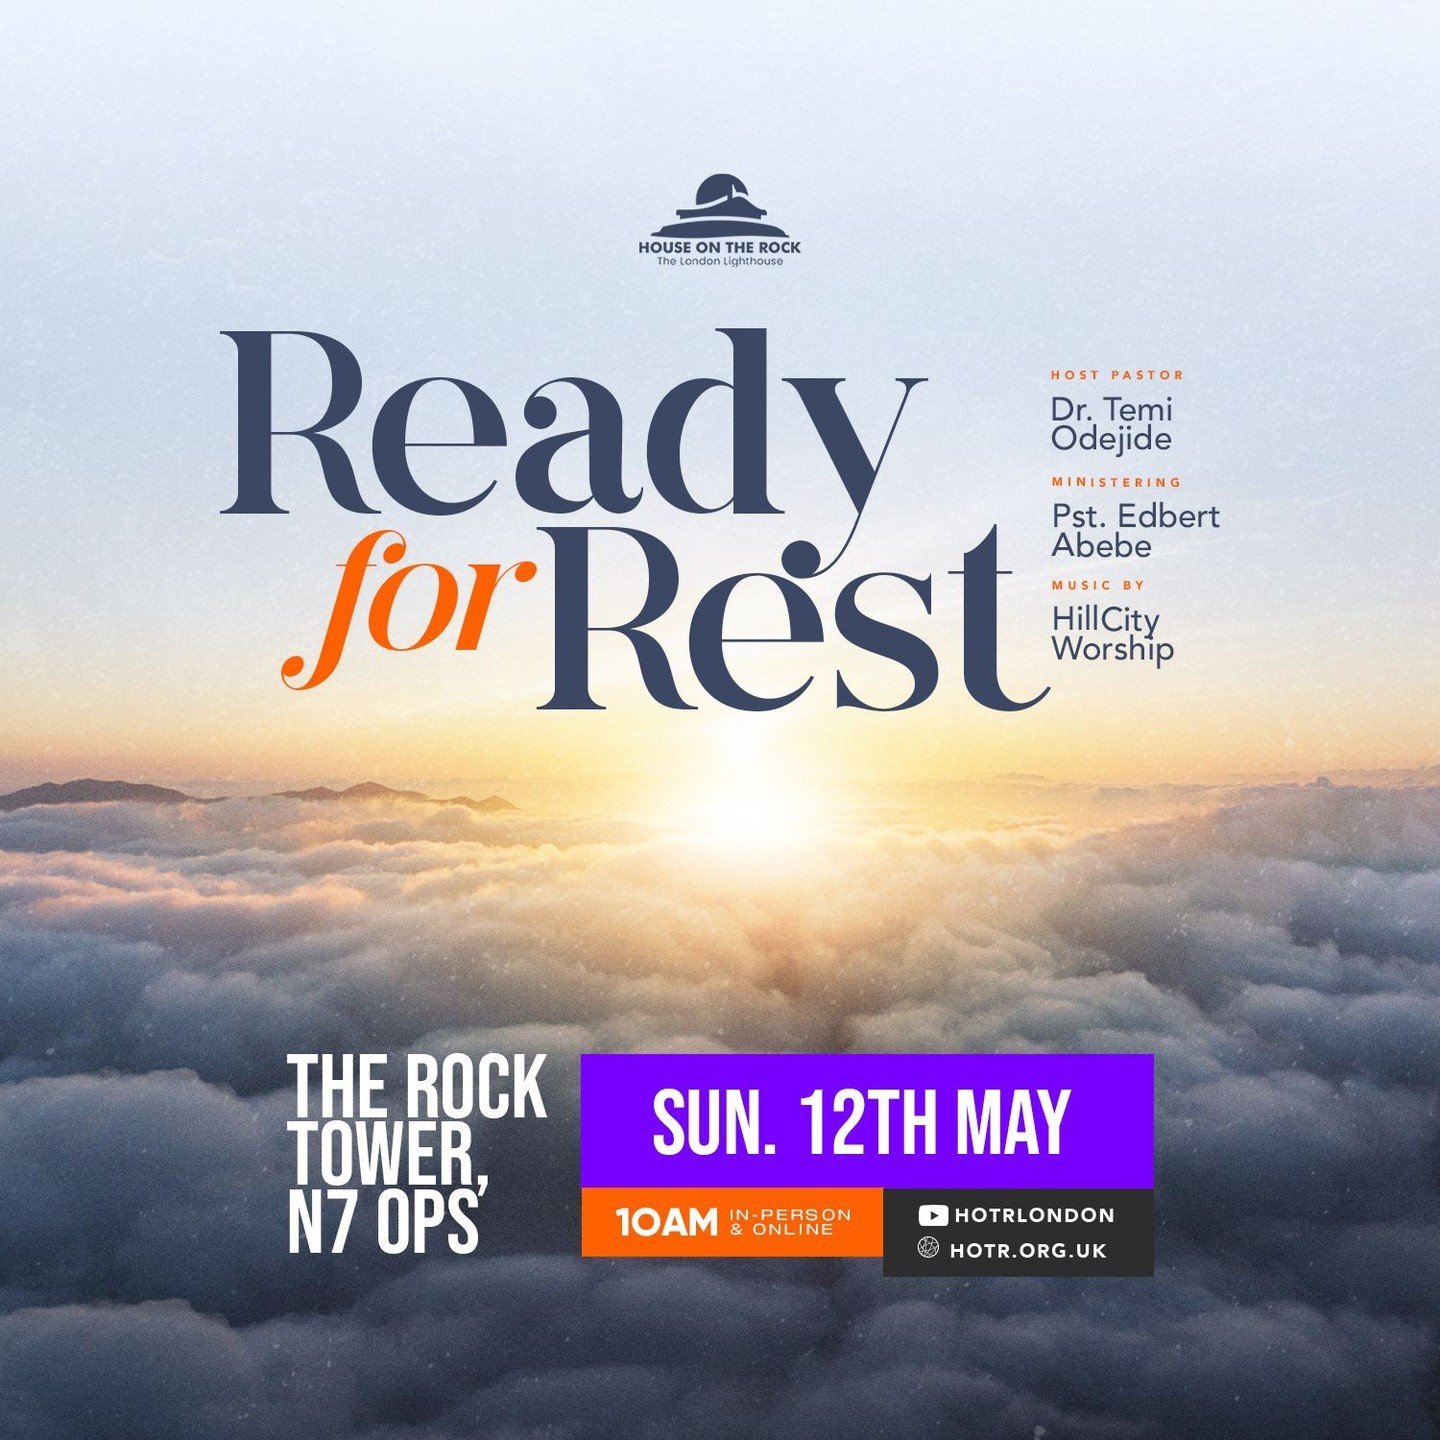 &quot;Are you tired of the constant hustle and bustle?&rdquo;

This Sunday, step into the Holy Sanctuary, during this month of Divine Rest as we explore the true rest designed by God.

Let go of stress, &amp; find solace, and embrace the rejuvenating